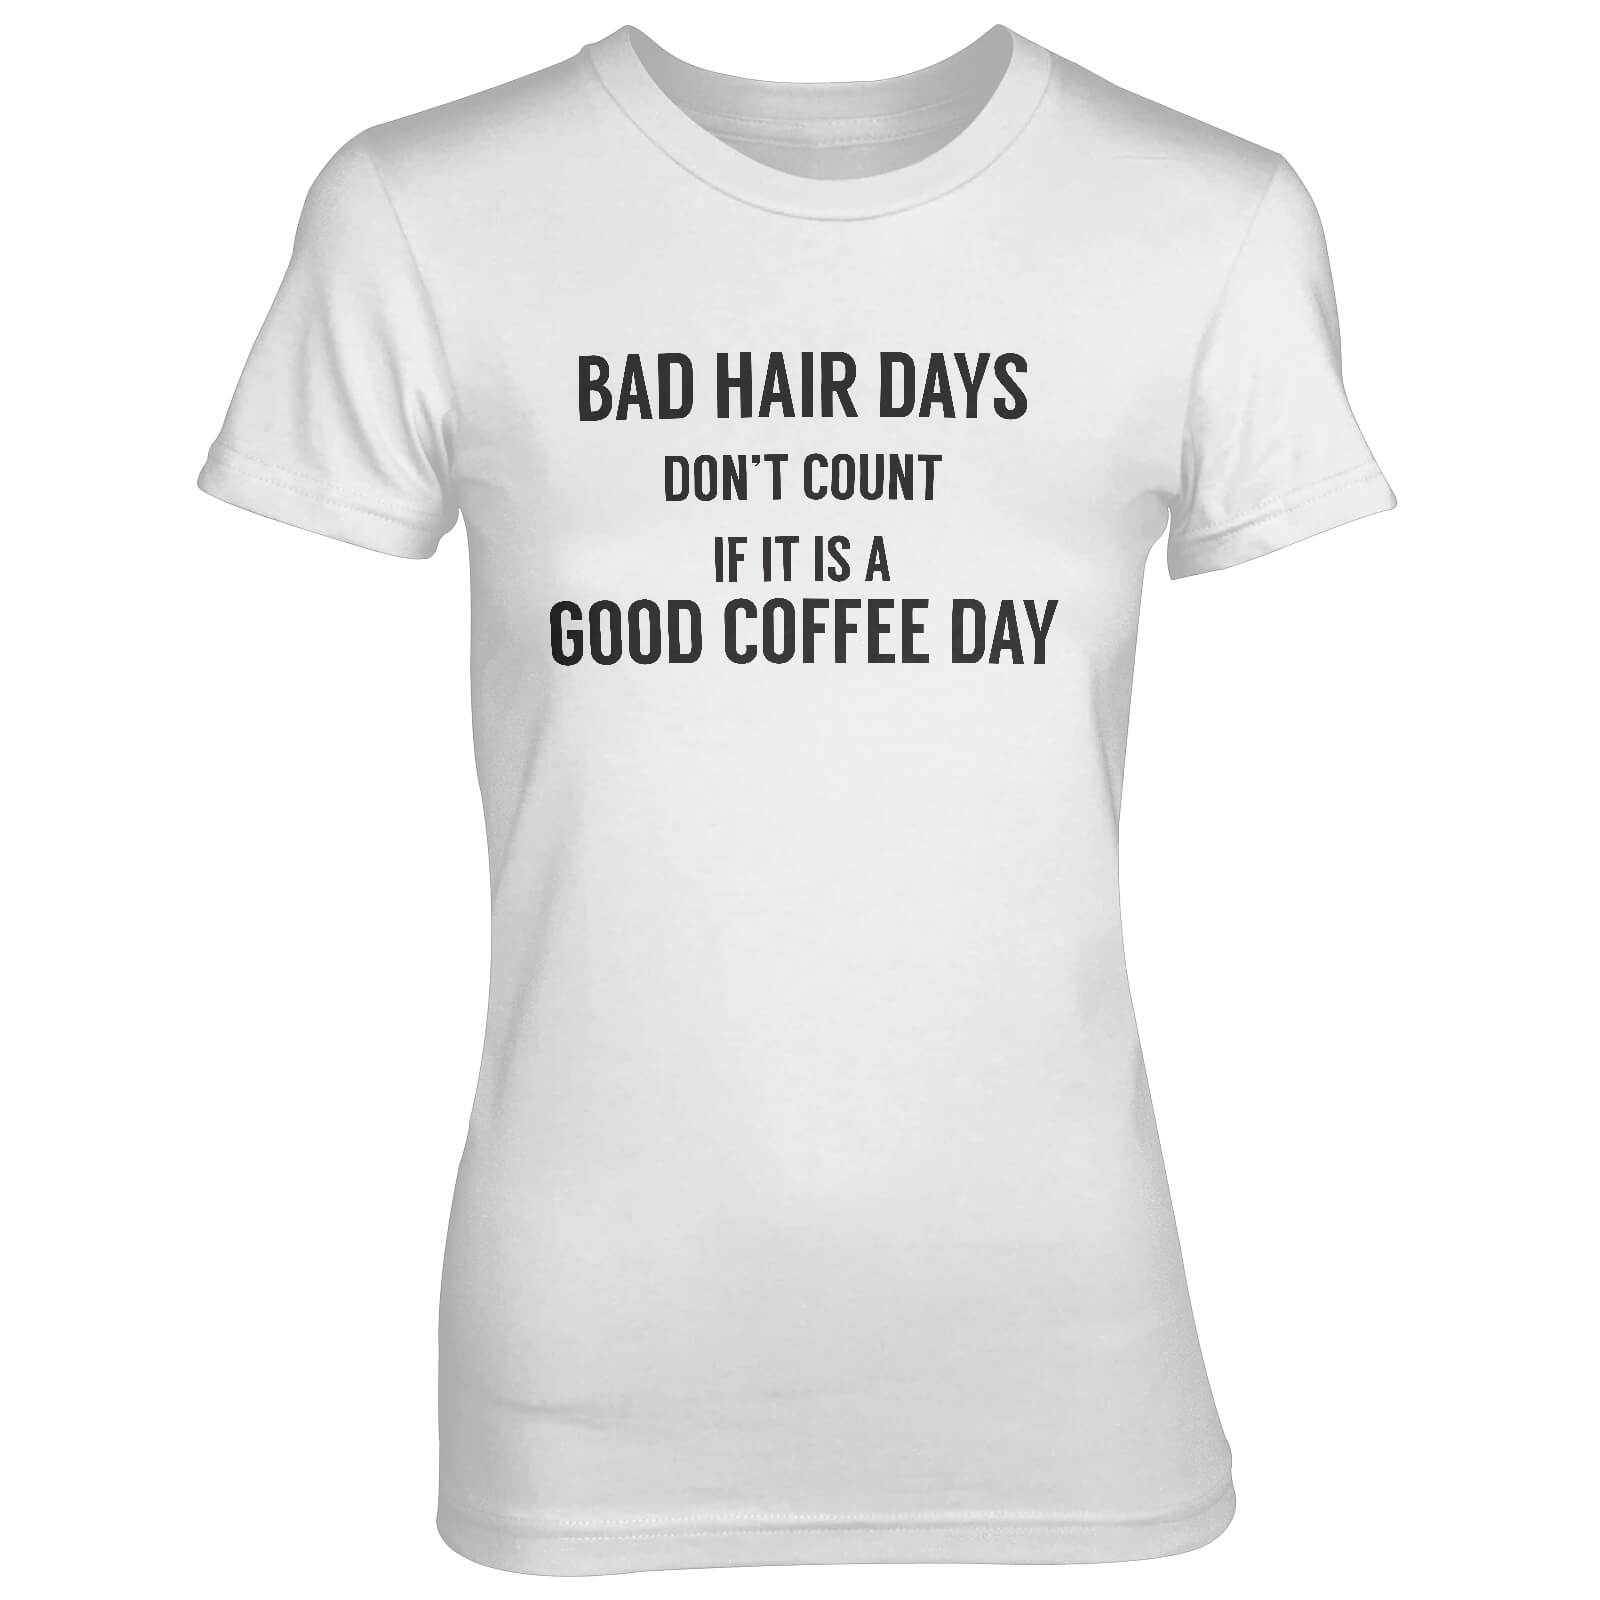 Bad Hair Days Don't Count If It's A Good Coffee Day Women's White T-Shirt - S - White